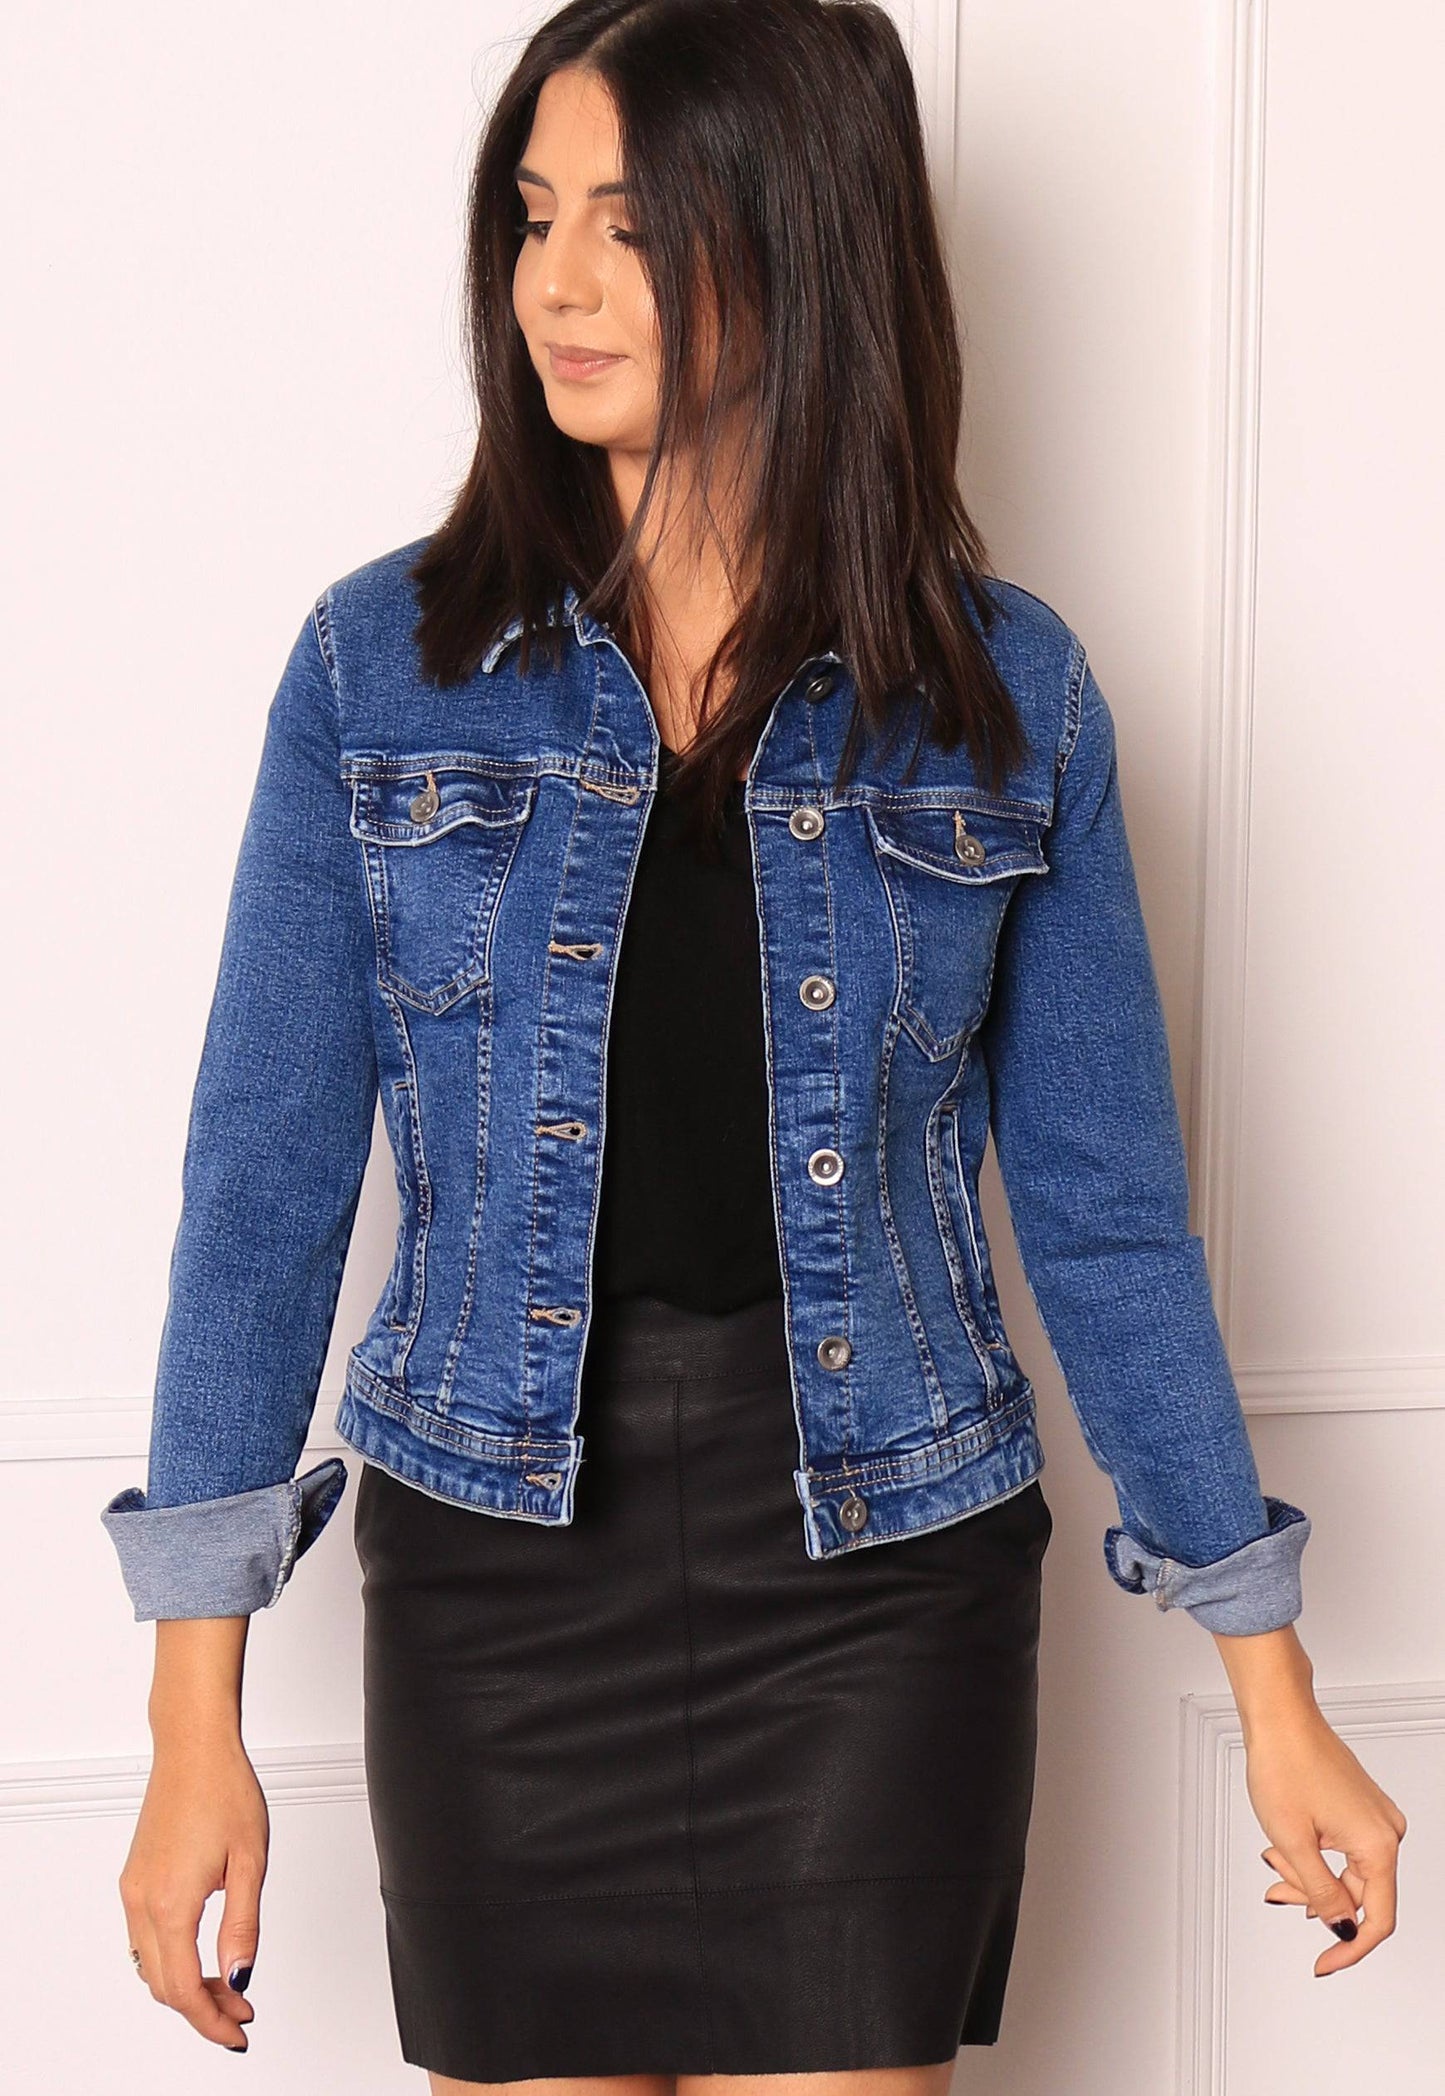 ONLY Tia Classic Denim Jacket in Mid Blue - concretebartops